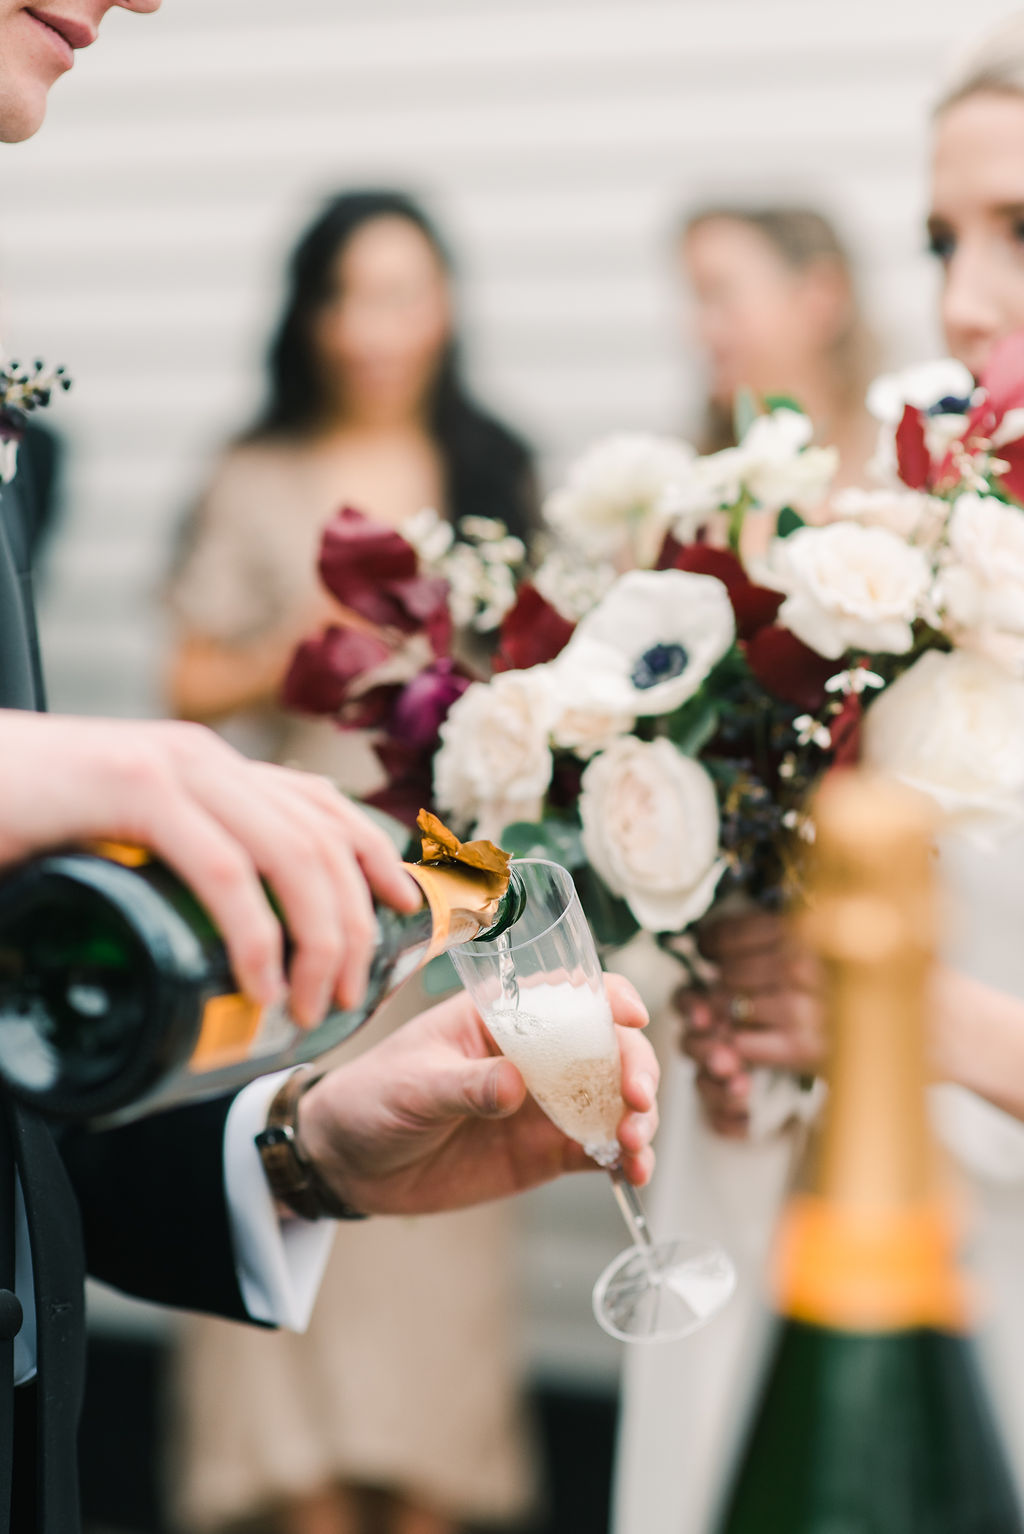 New Year's Eve Wedding Celebration Featuring Champagne Libations to Bring in The New Year